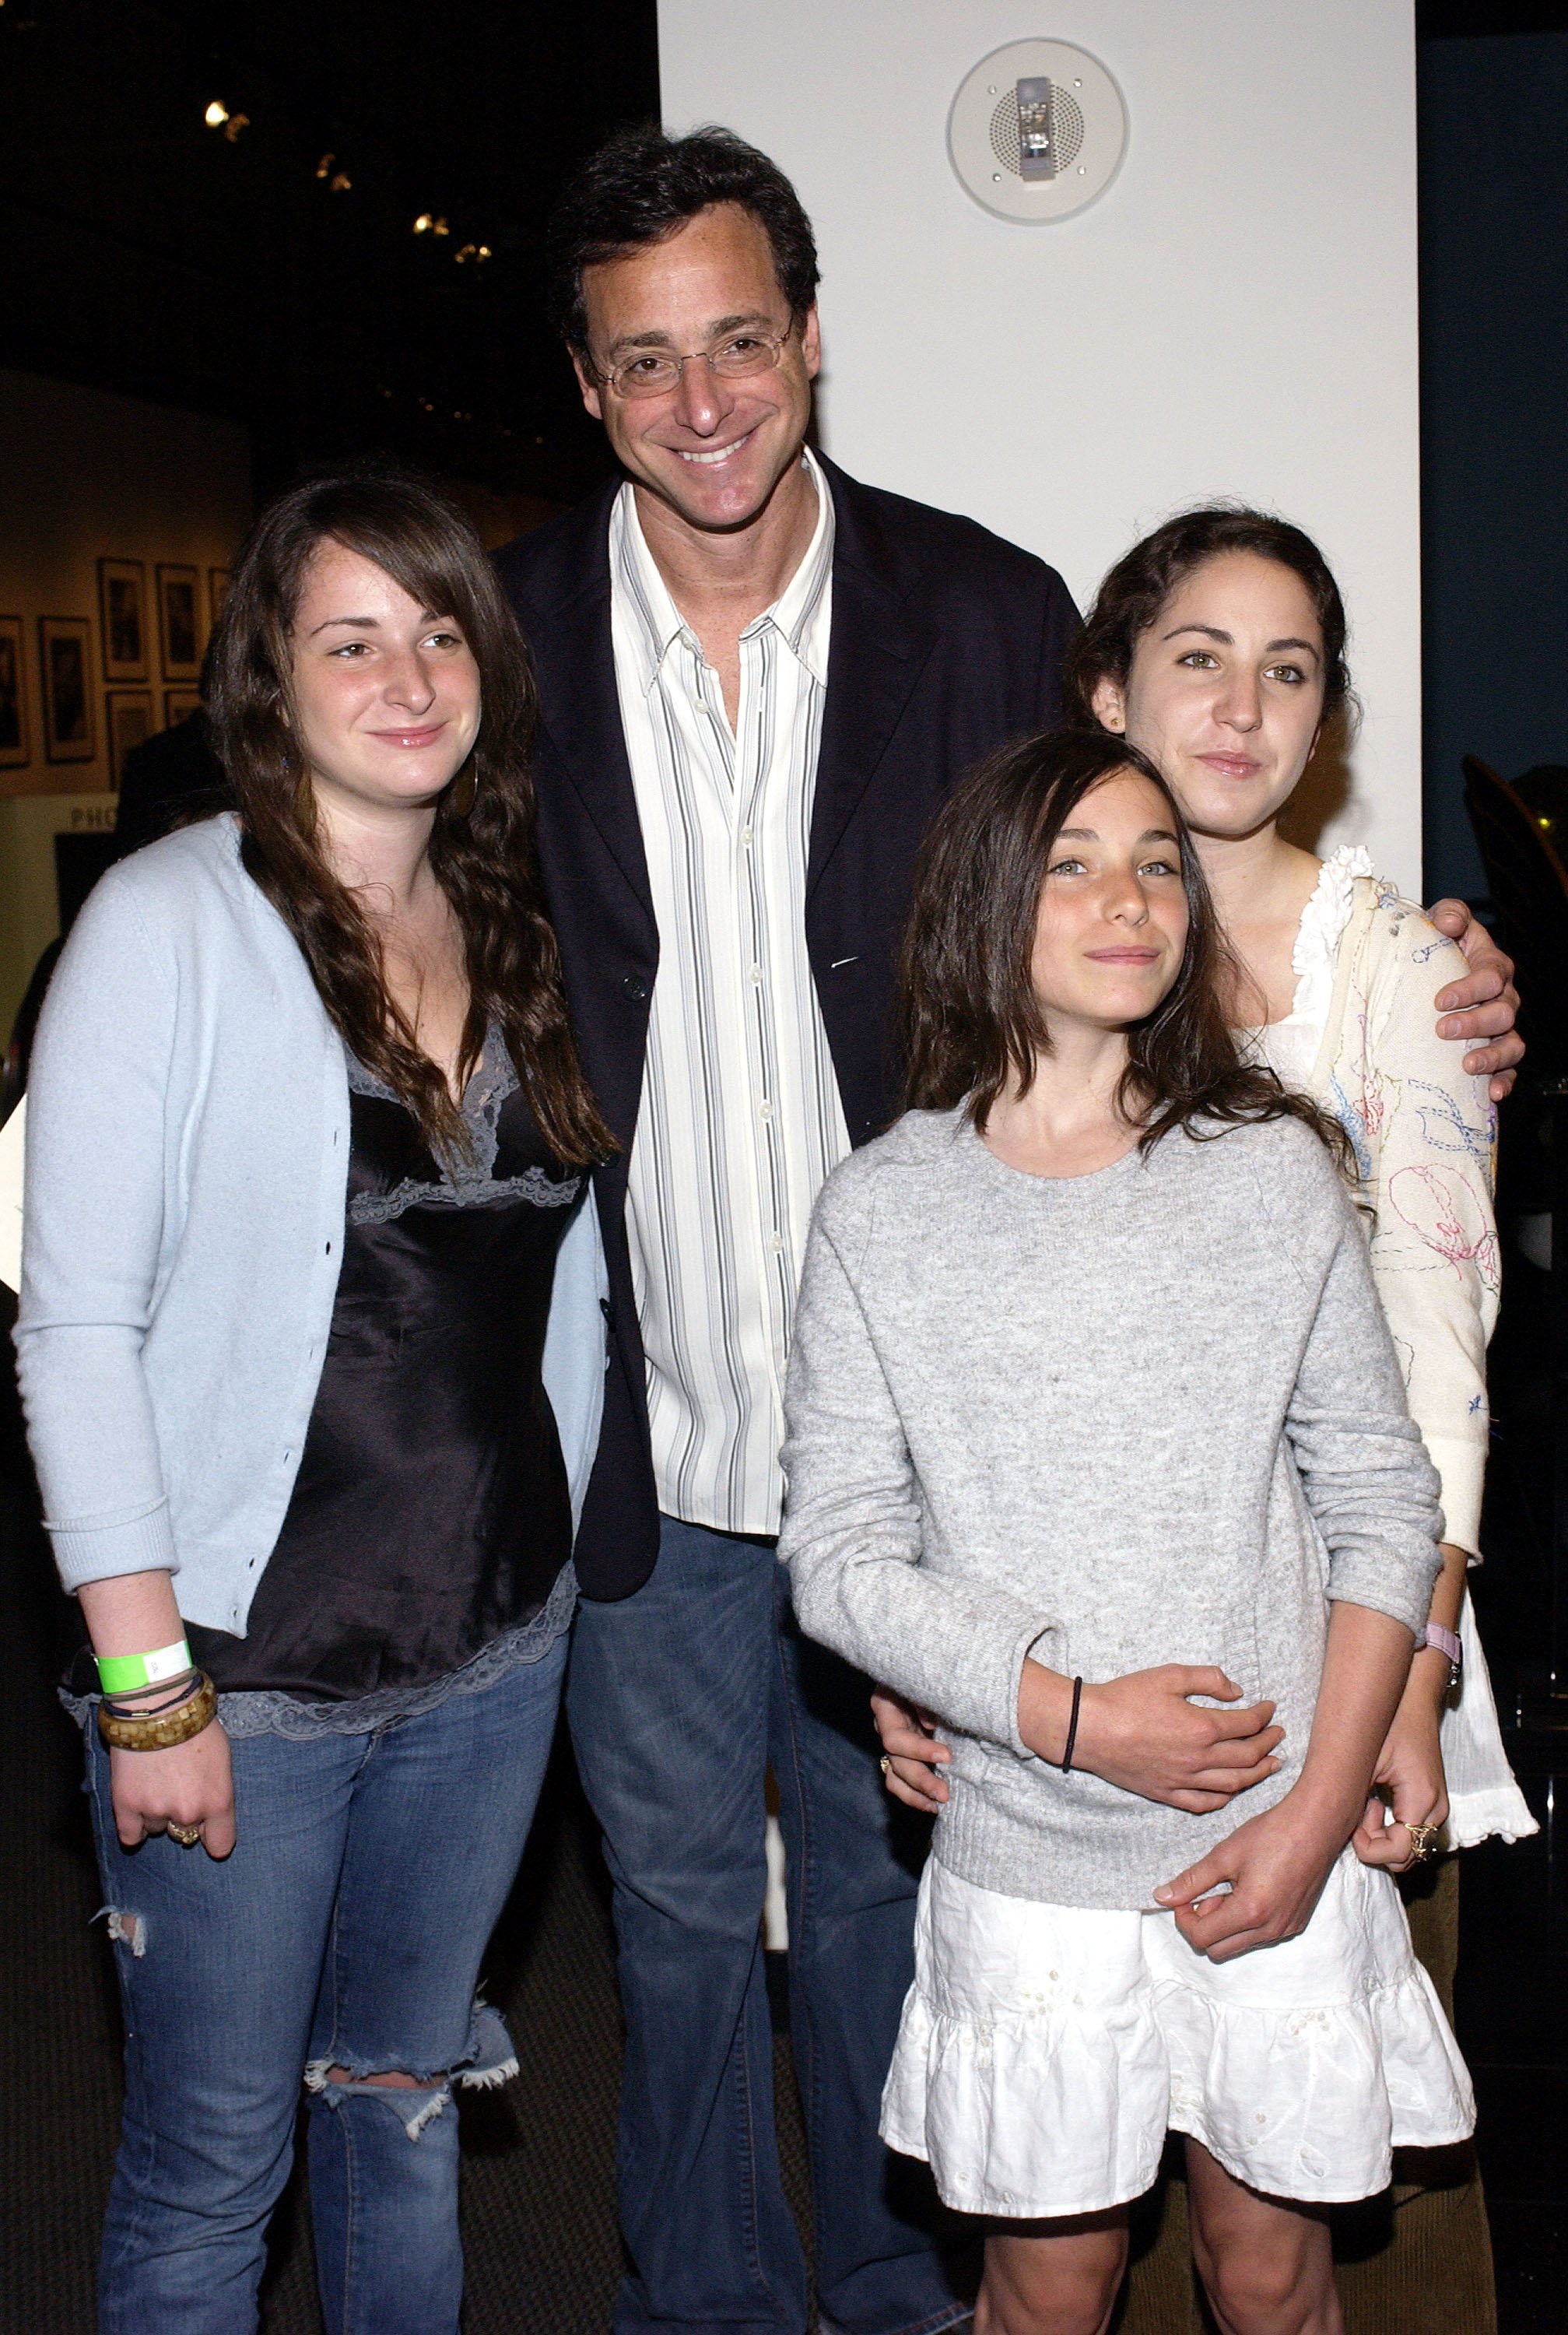 Bob Saget and his daughters Lara, Aubrey and Jennie arrive at the Golden Dads Awards ceremony at the Peterson Automotive Museum on June 15, 2005. | Source: Getty Images